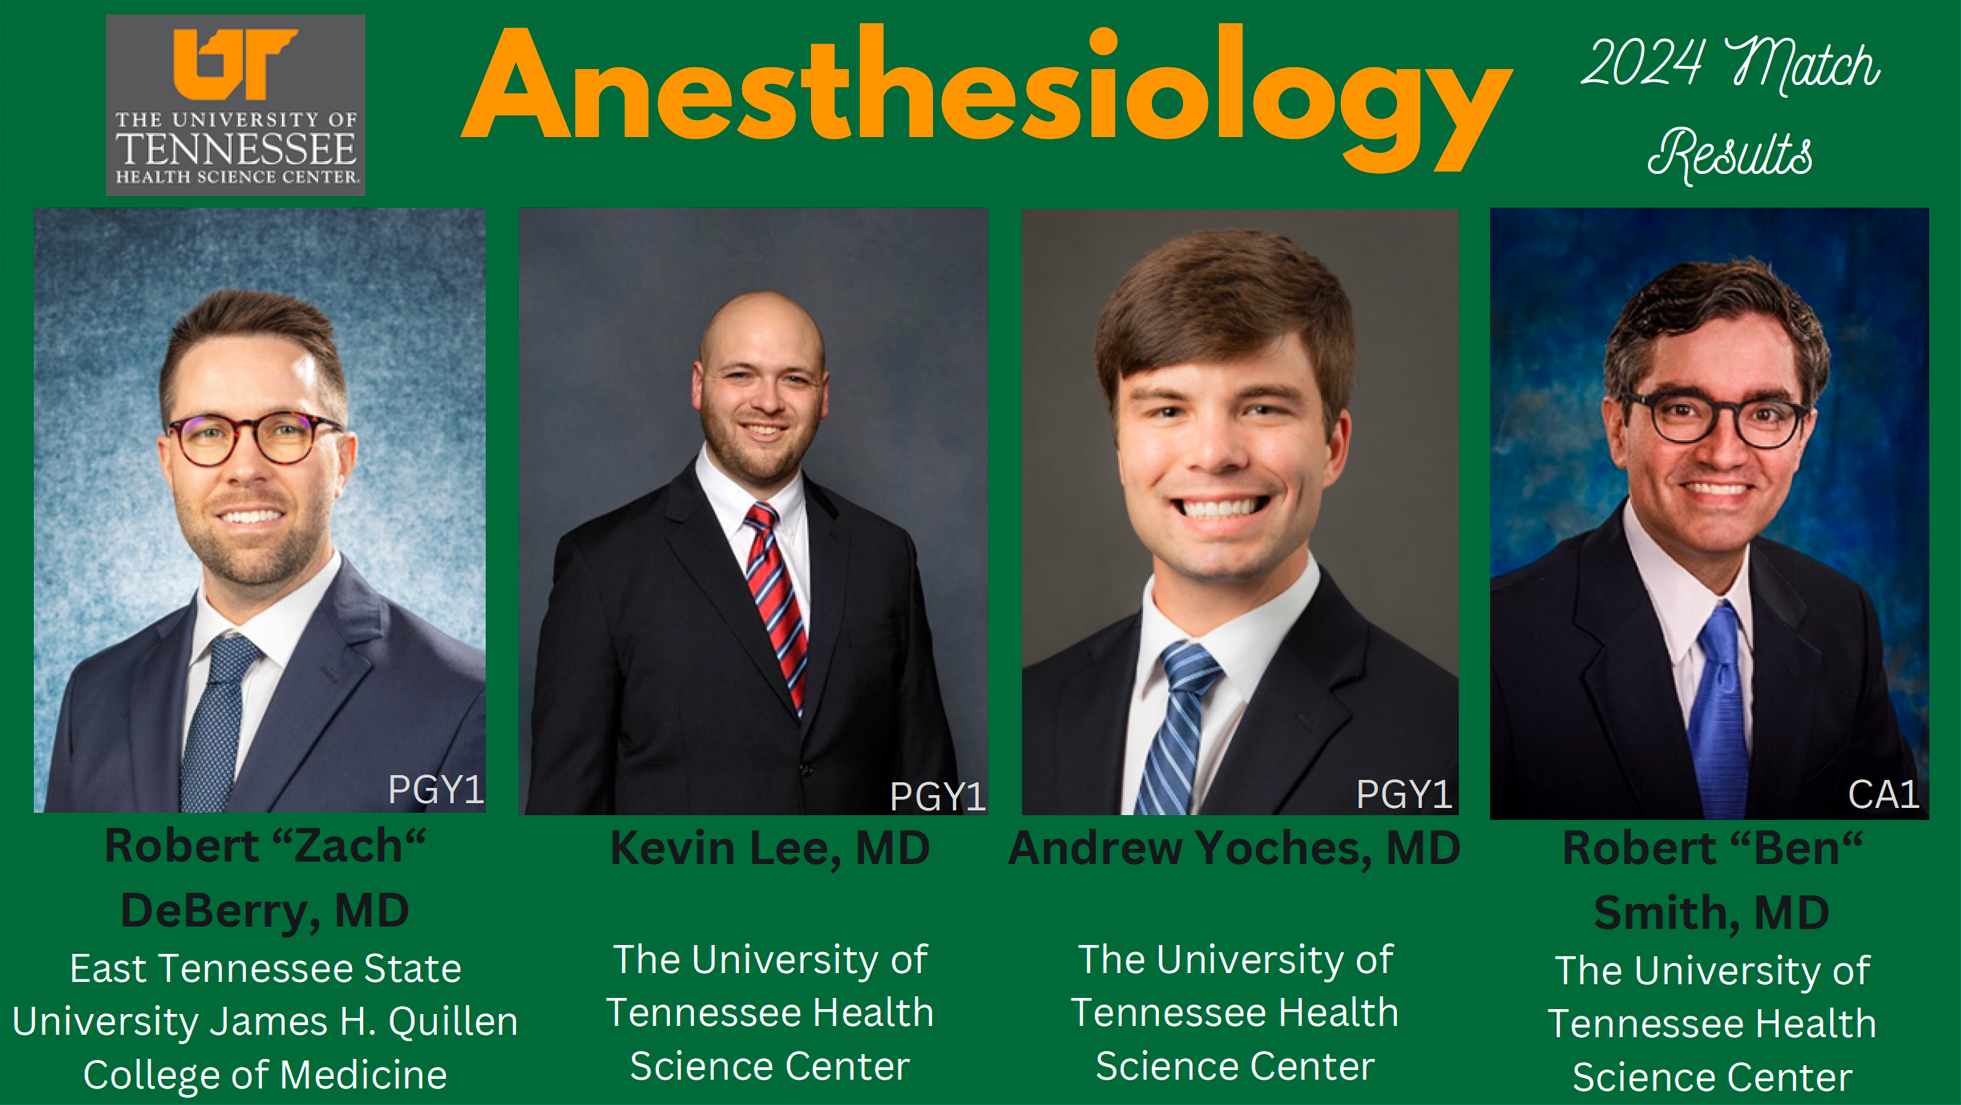 2024 Anesthesiology matches: Drs. DeBerry, Lee, Yoches, and Smith